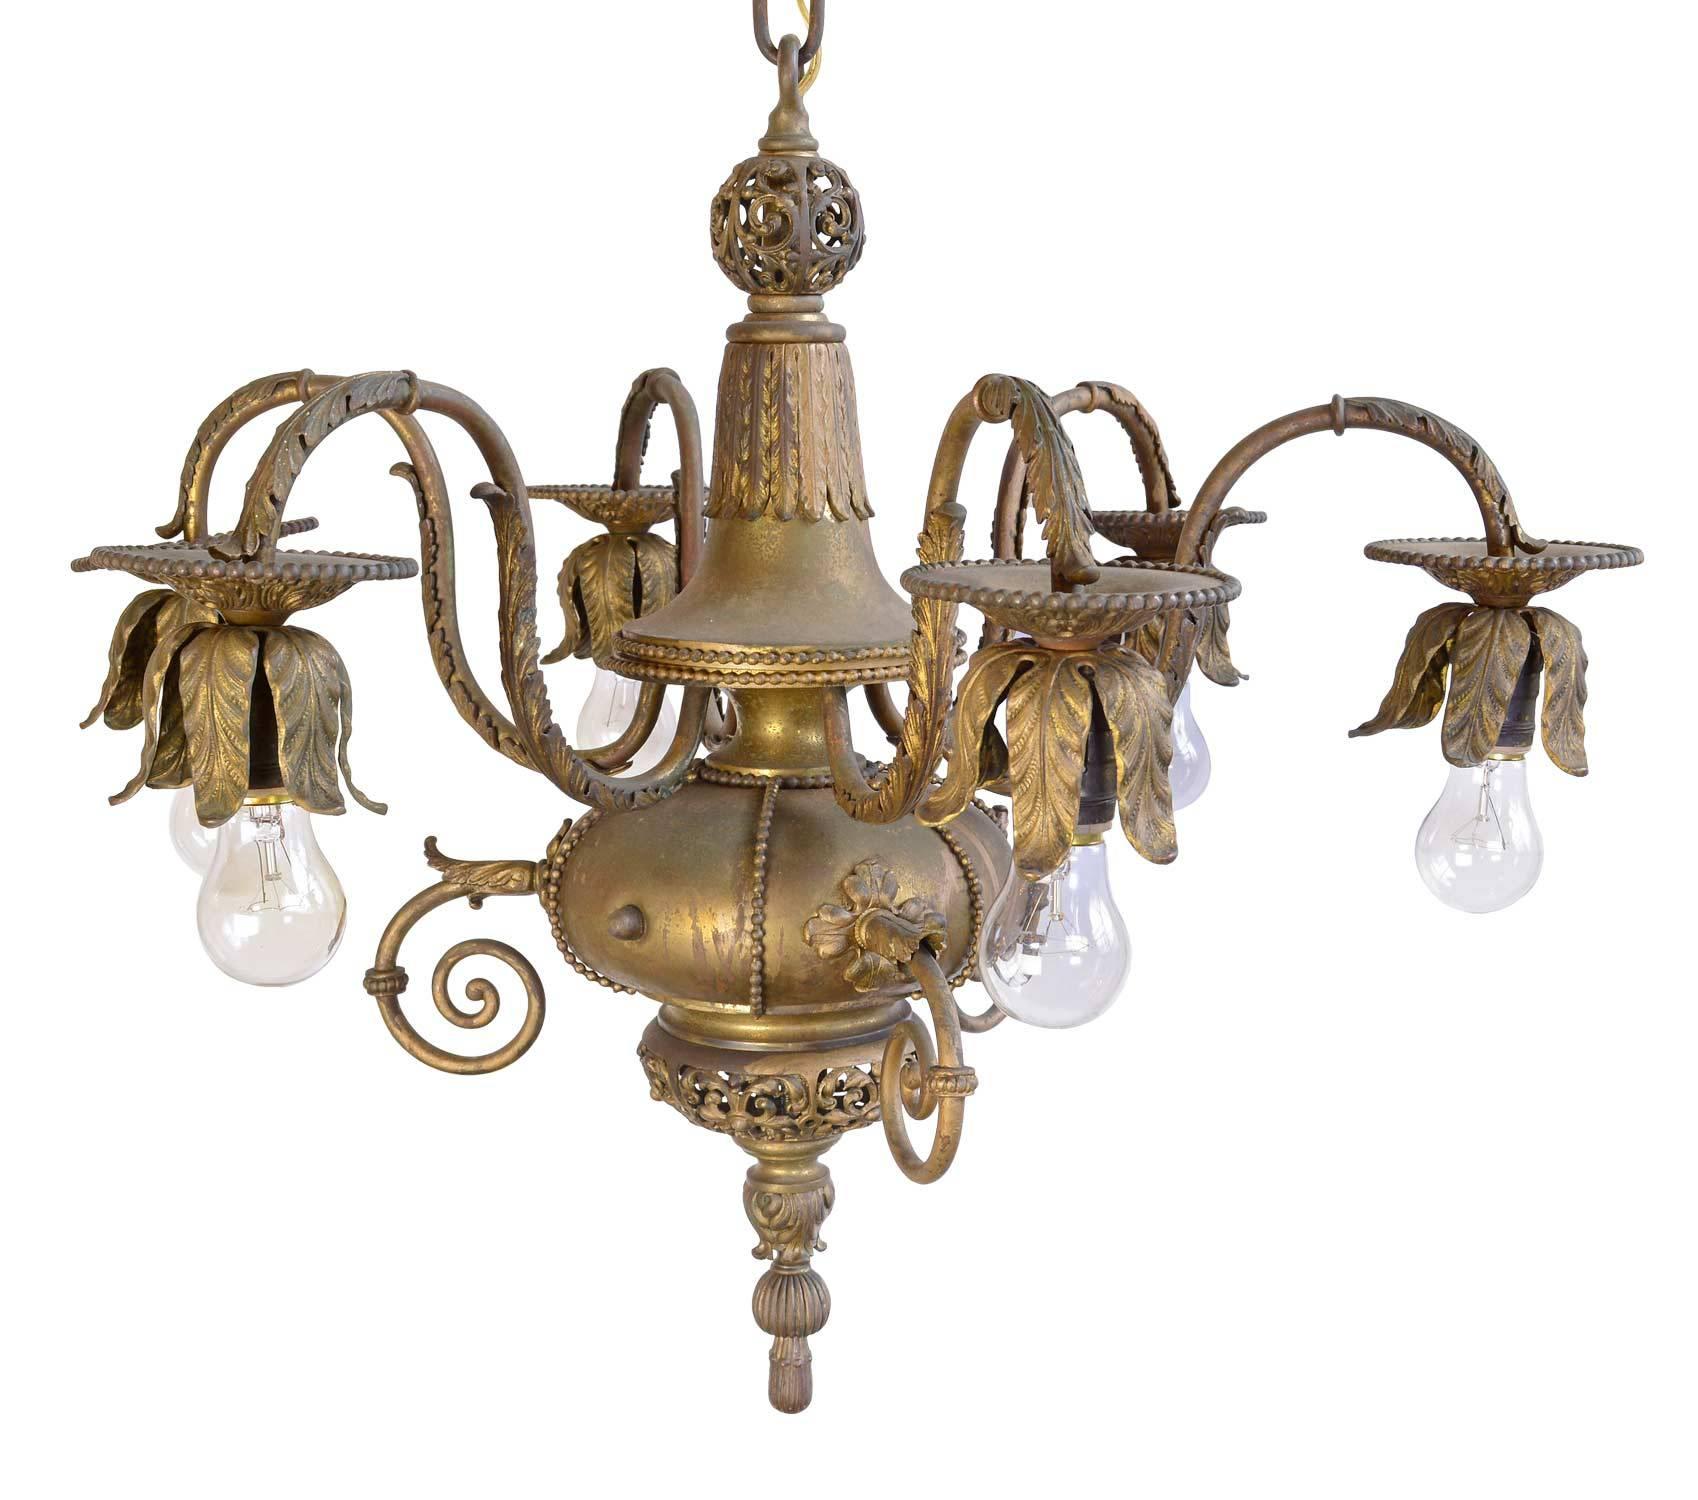 This intricate Victorian-era fixture in cast brass and silver plate has ornate filigree patterns, beading, and heavy cast arms with leaves and scroll work. The fixture's six lights provide generous light and an elegant touch to a room. The fixture